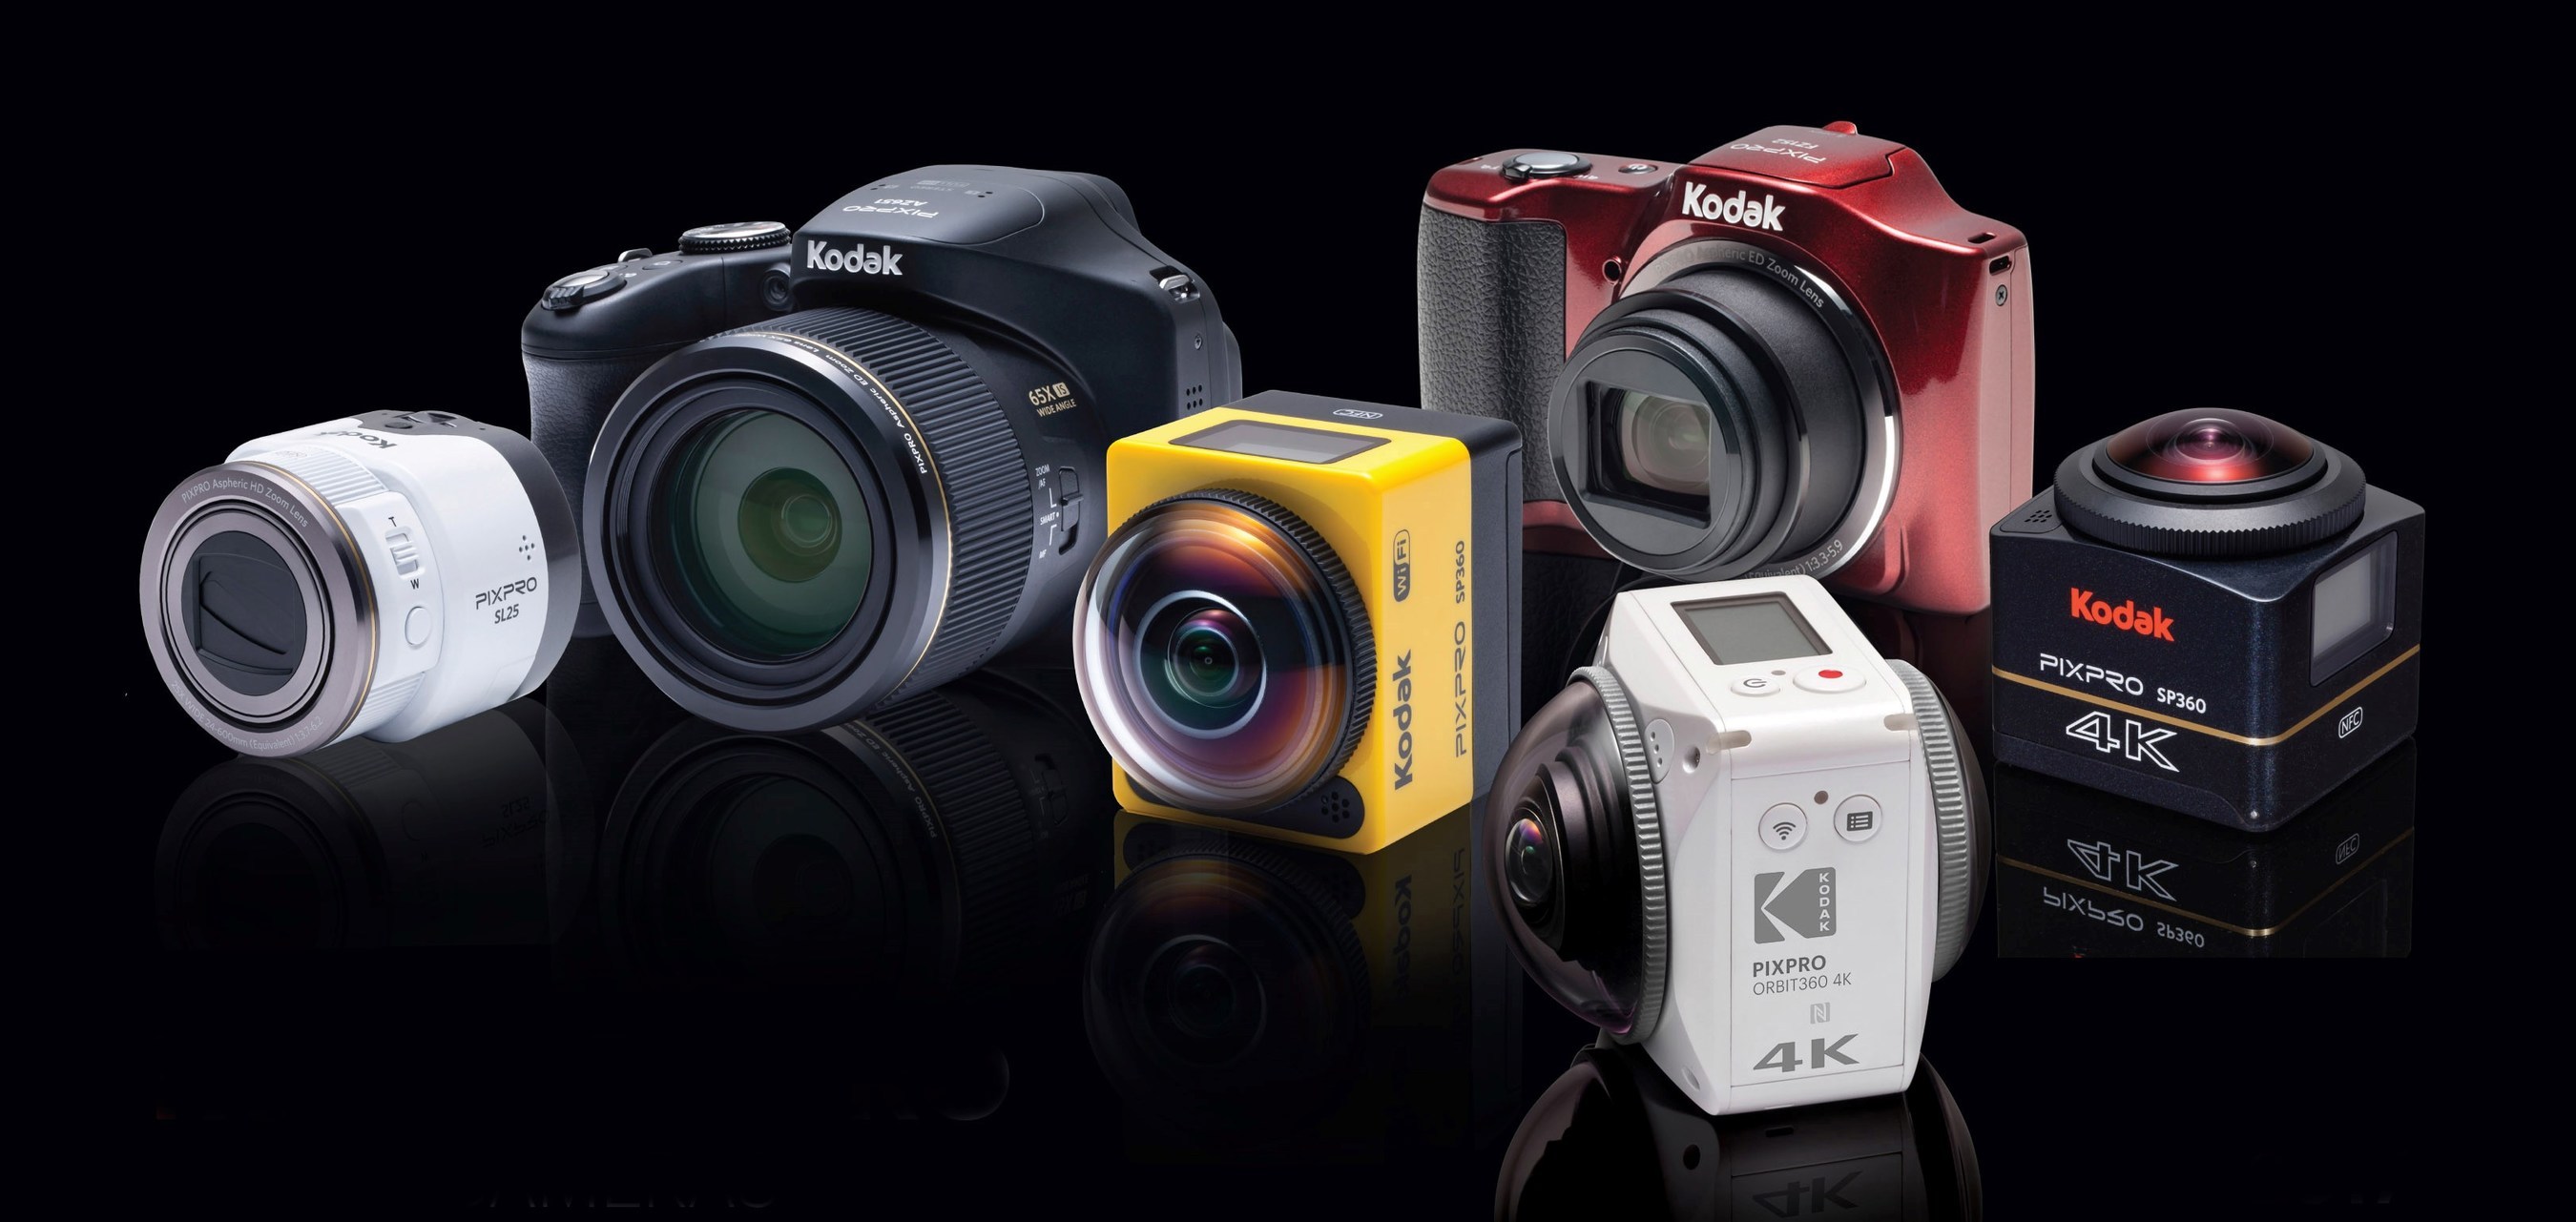 Kodak Pixpro Digital Camera And Devices Line Up Announced With Worldwide Expansion Of Additional 360 Vr Camera Offerings In 17